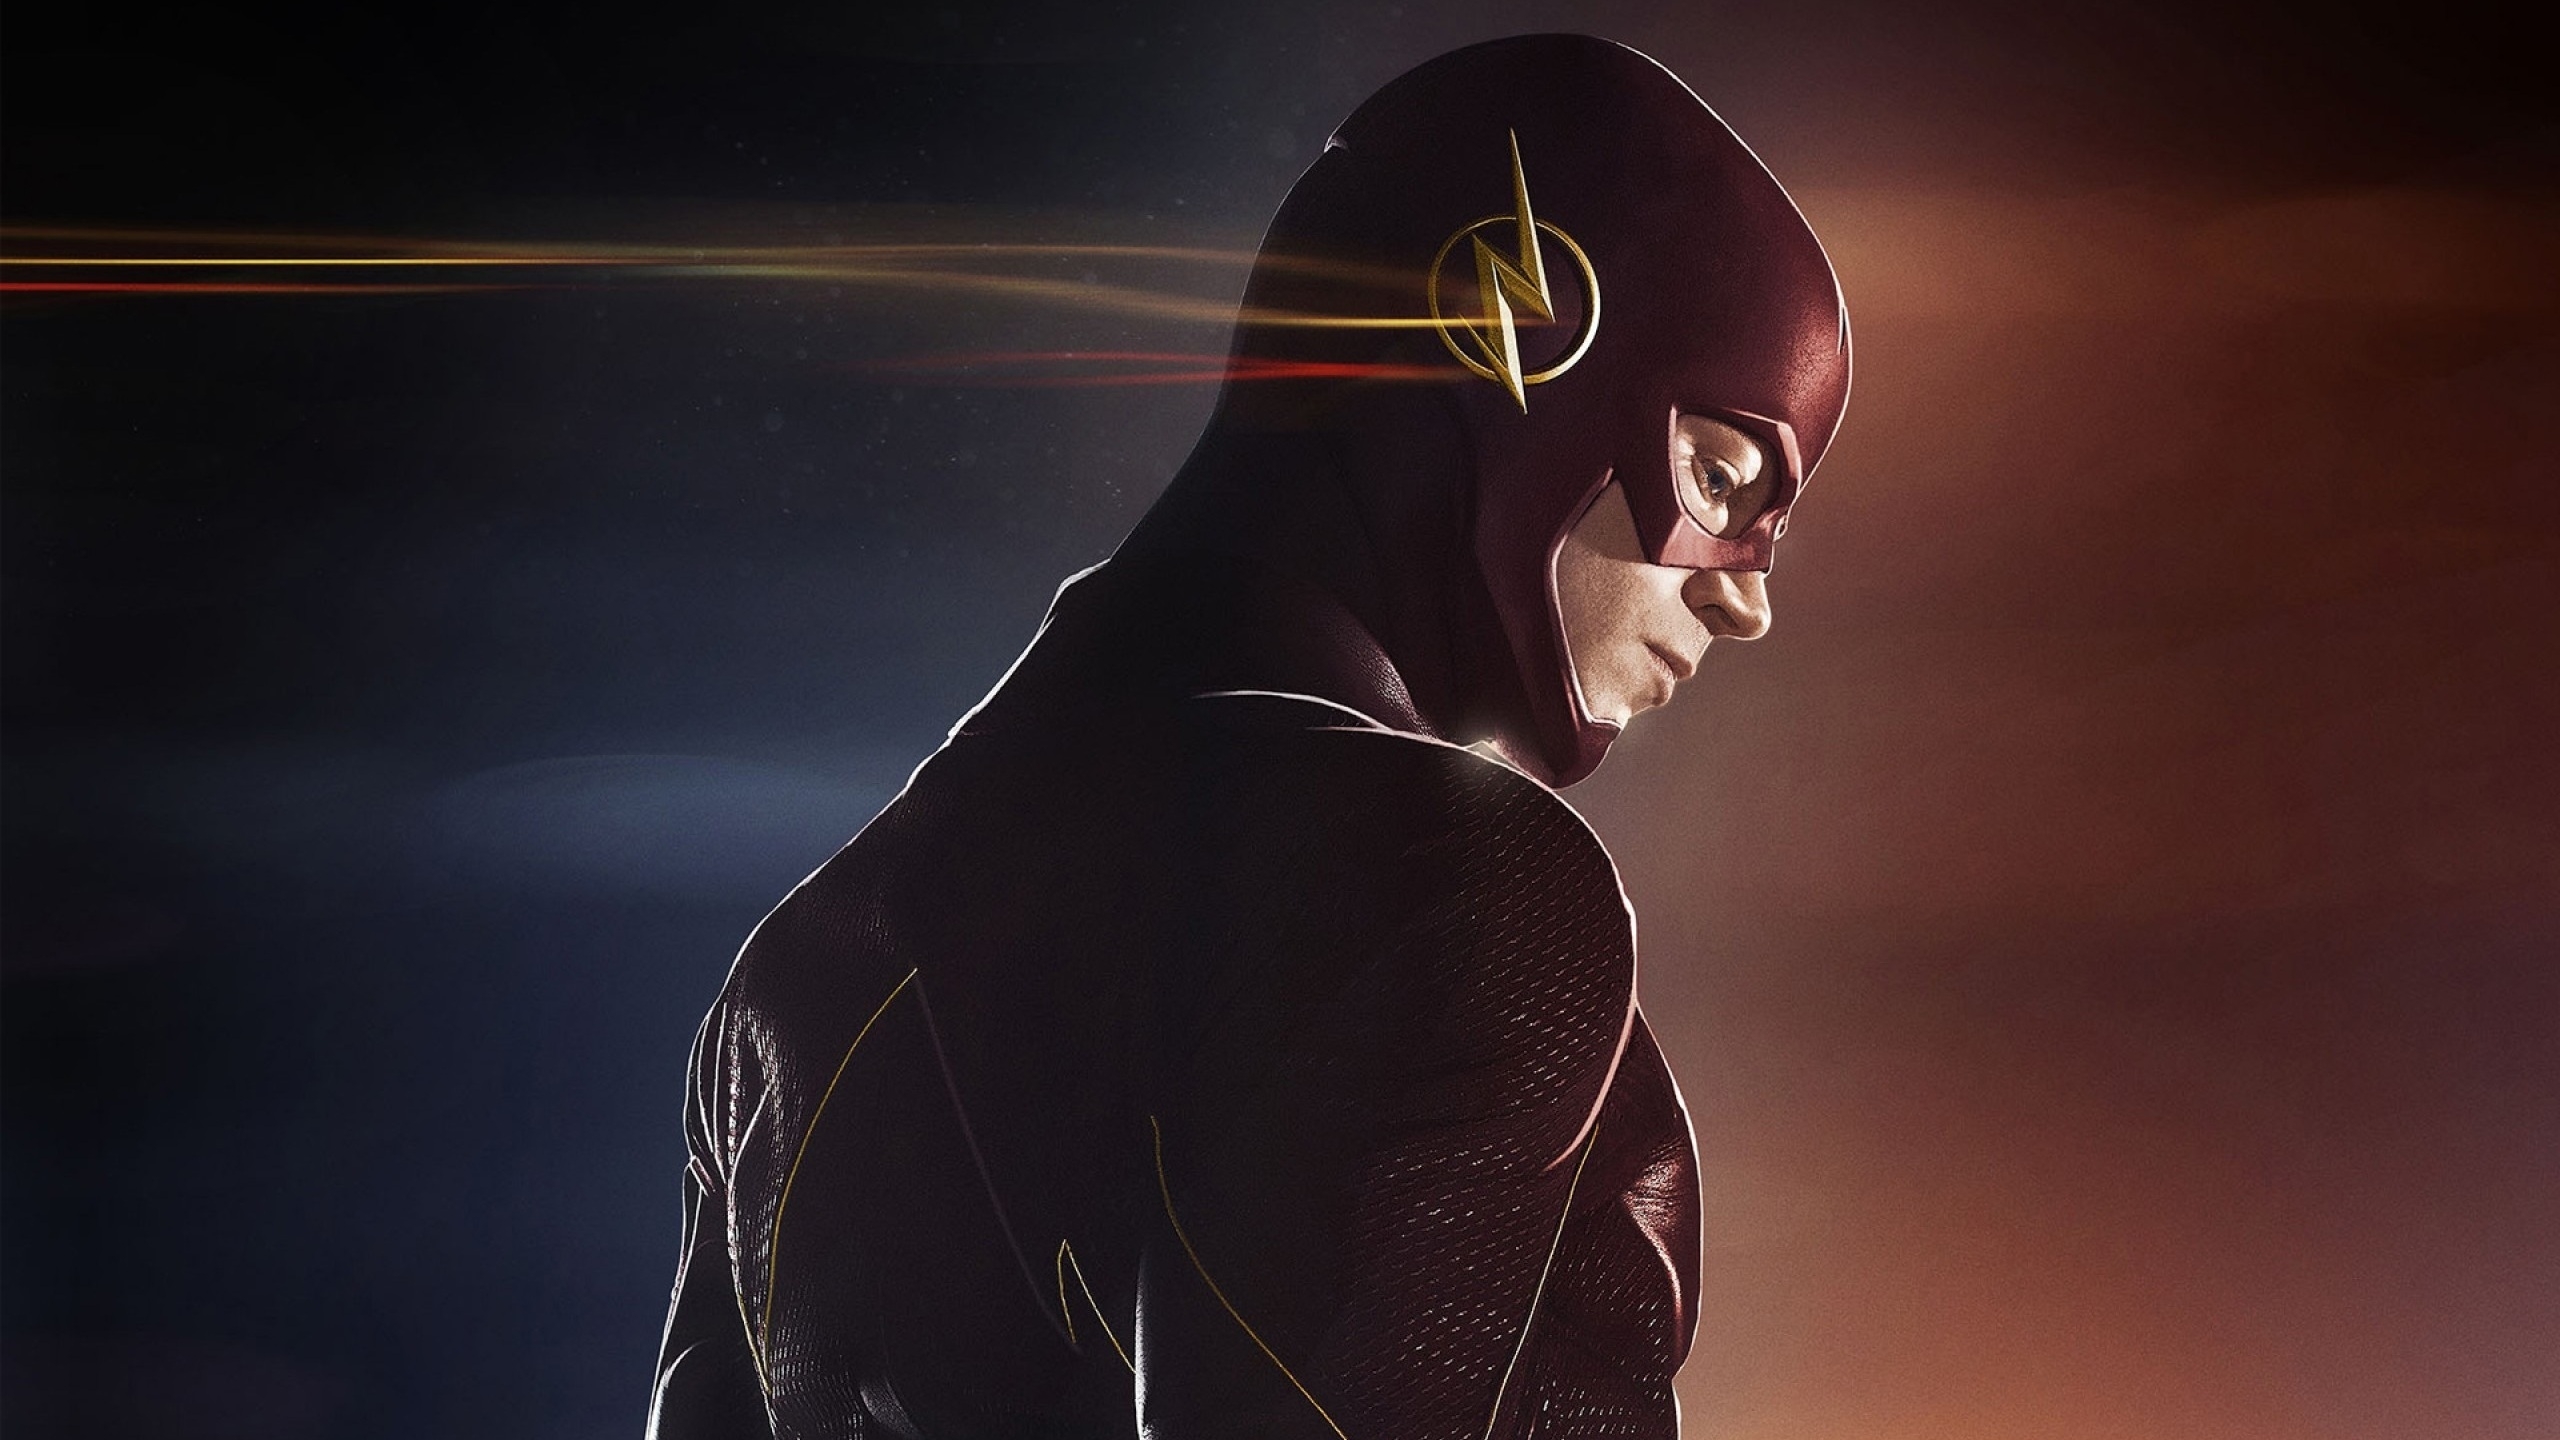 The Flash Poster for 2560x1440 HDTV resolution